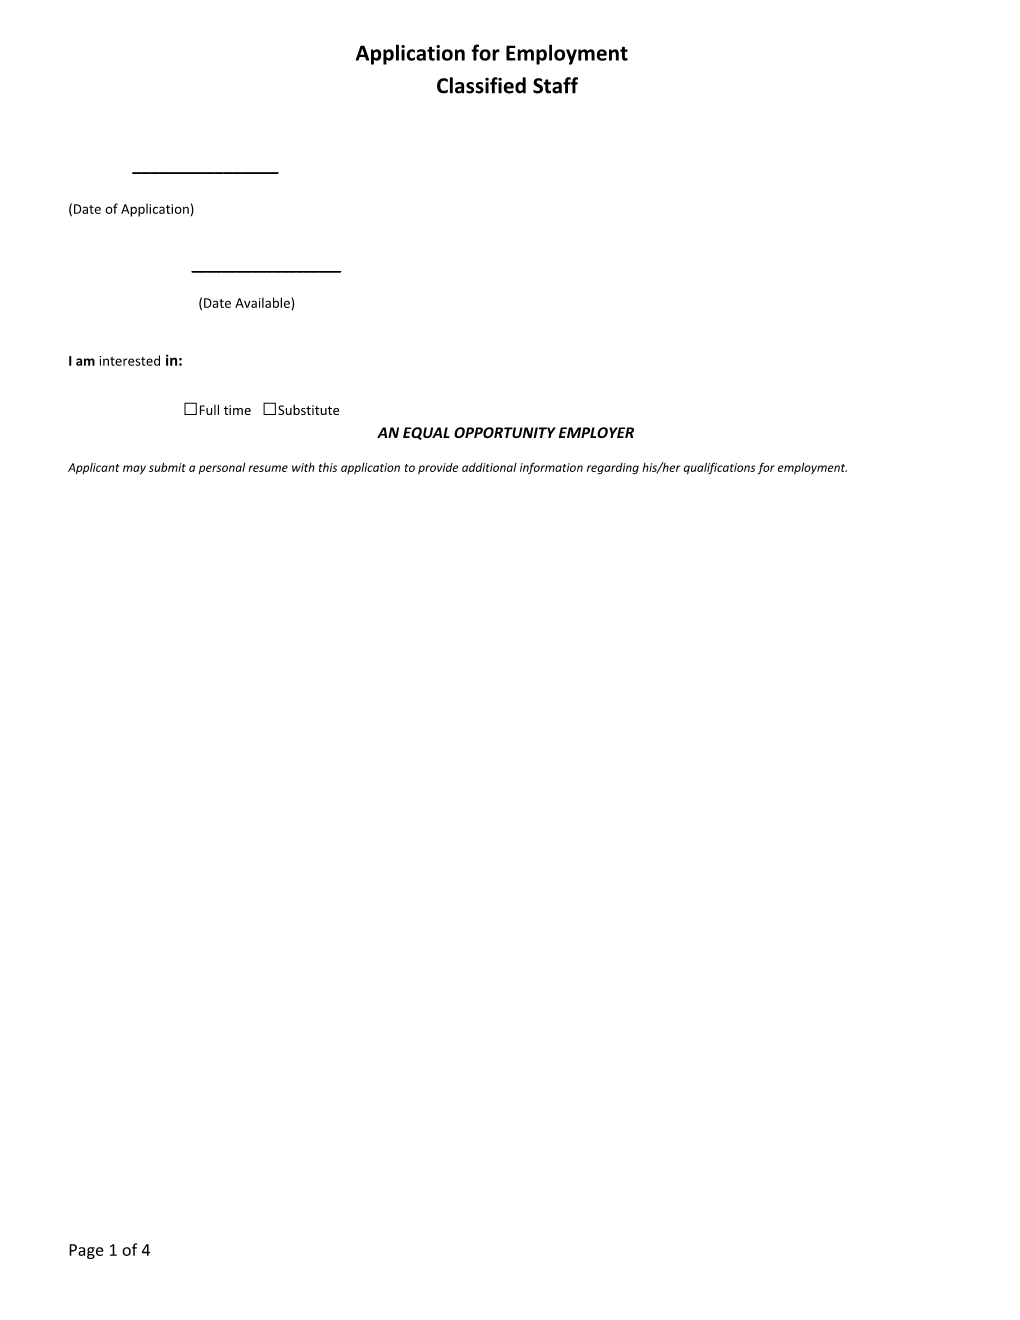 Application for Employment s176